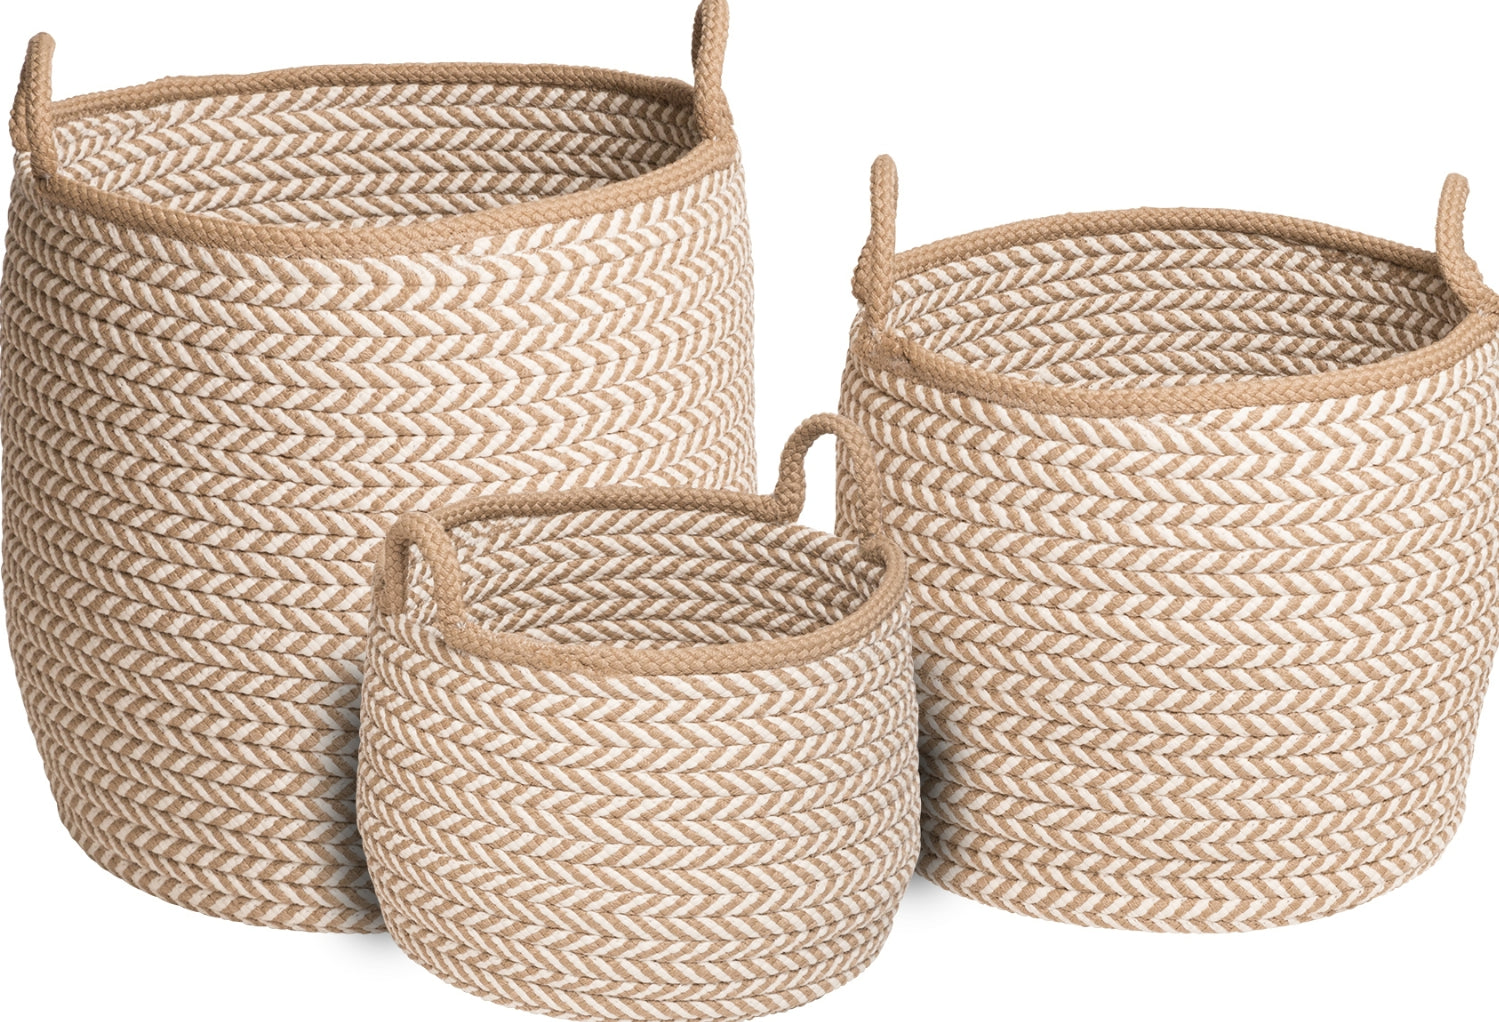 Colonial Mills Preve Basket CV43 Taupe and White